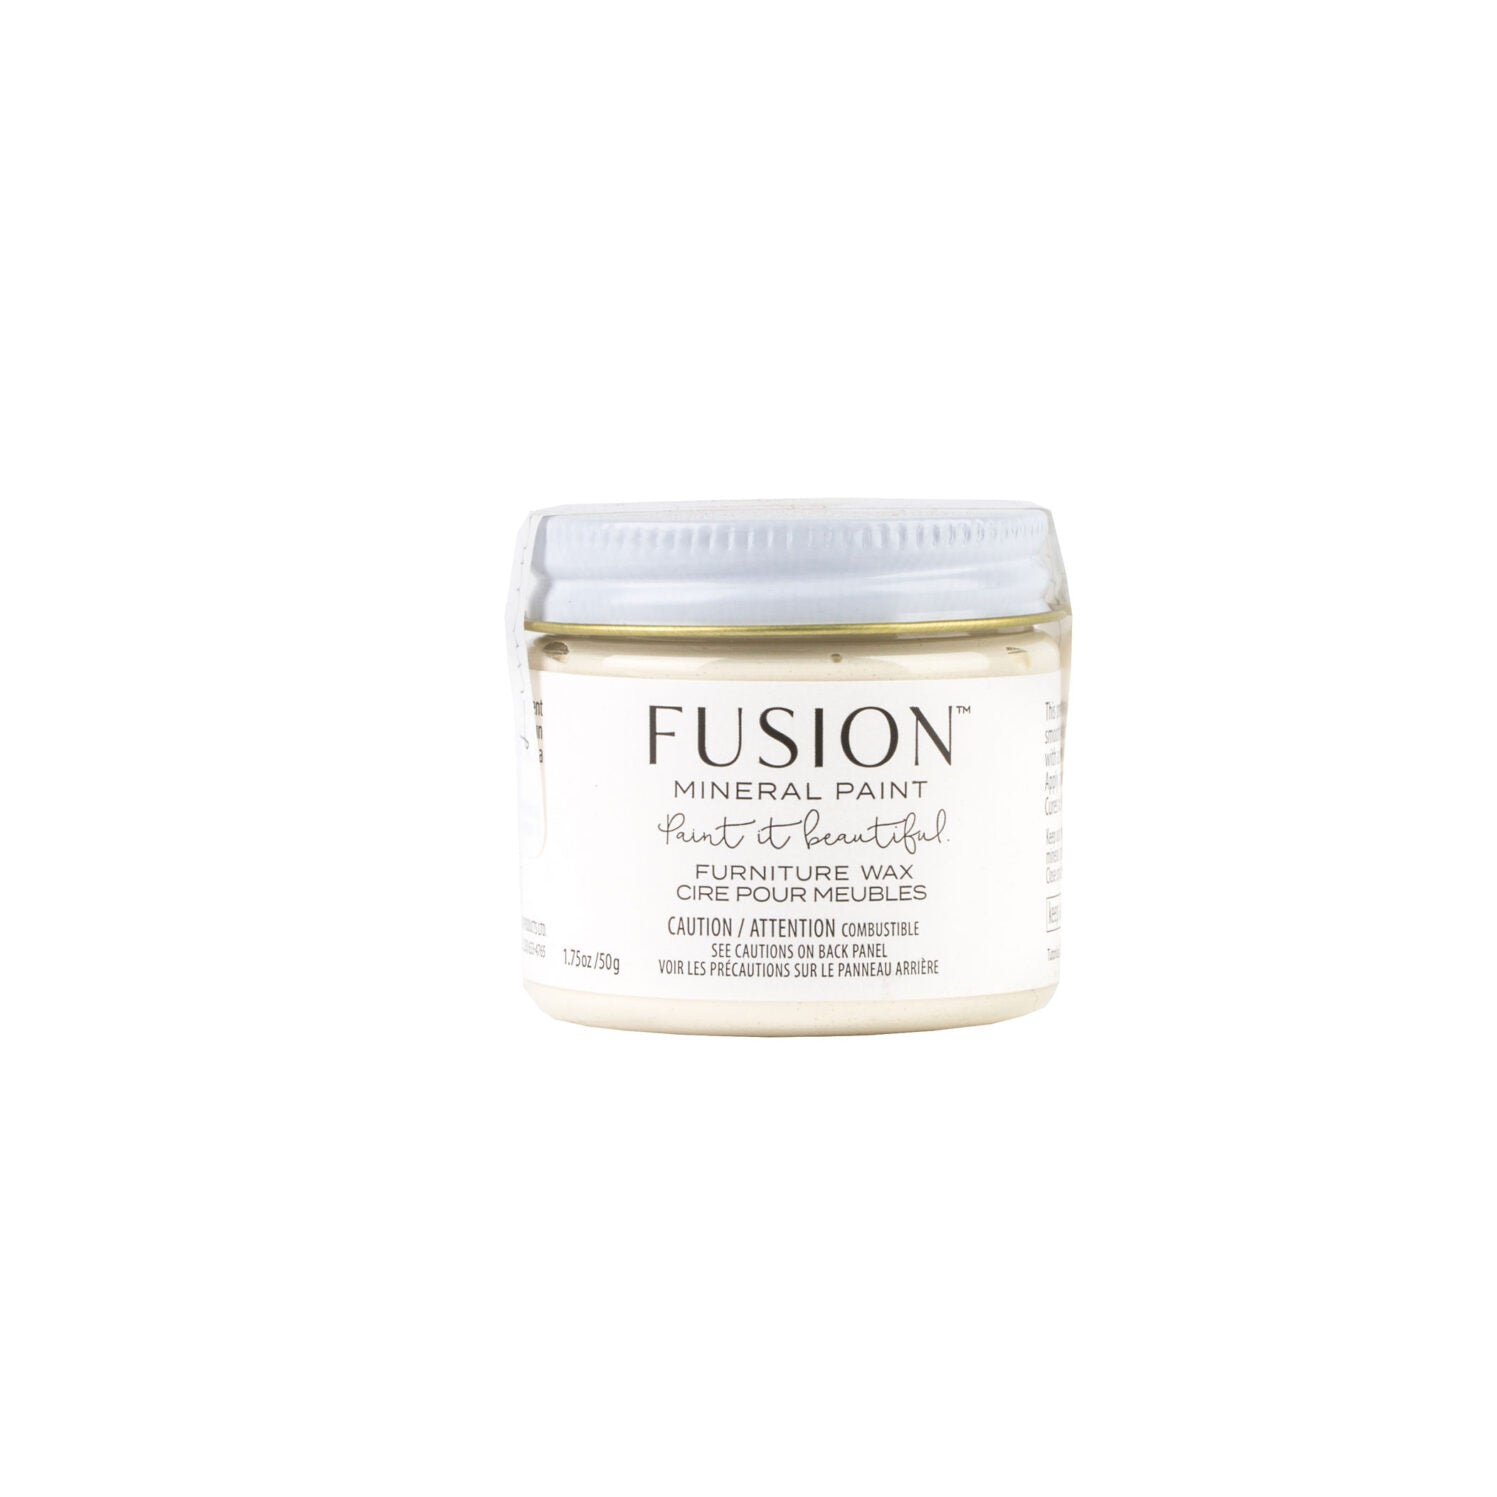 Fusion Furniture Wax LIMING | fusion-furniture-wax-liming | Refinished P/L